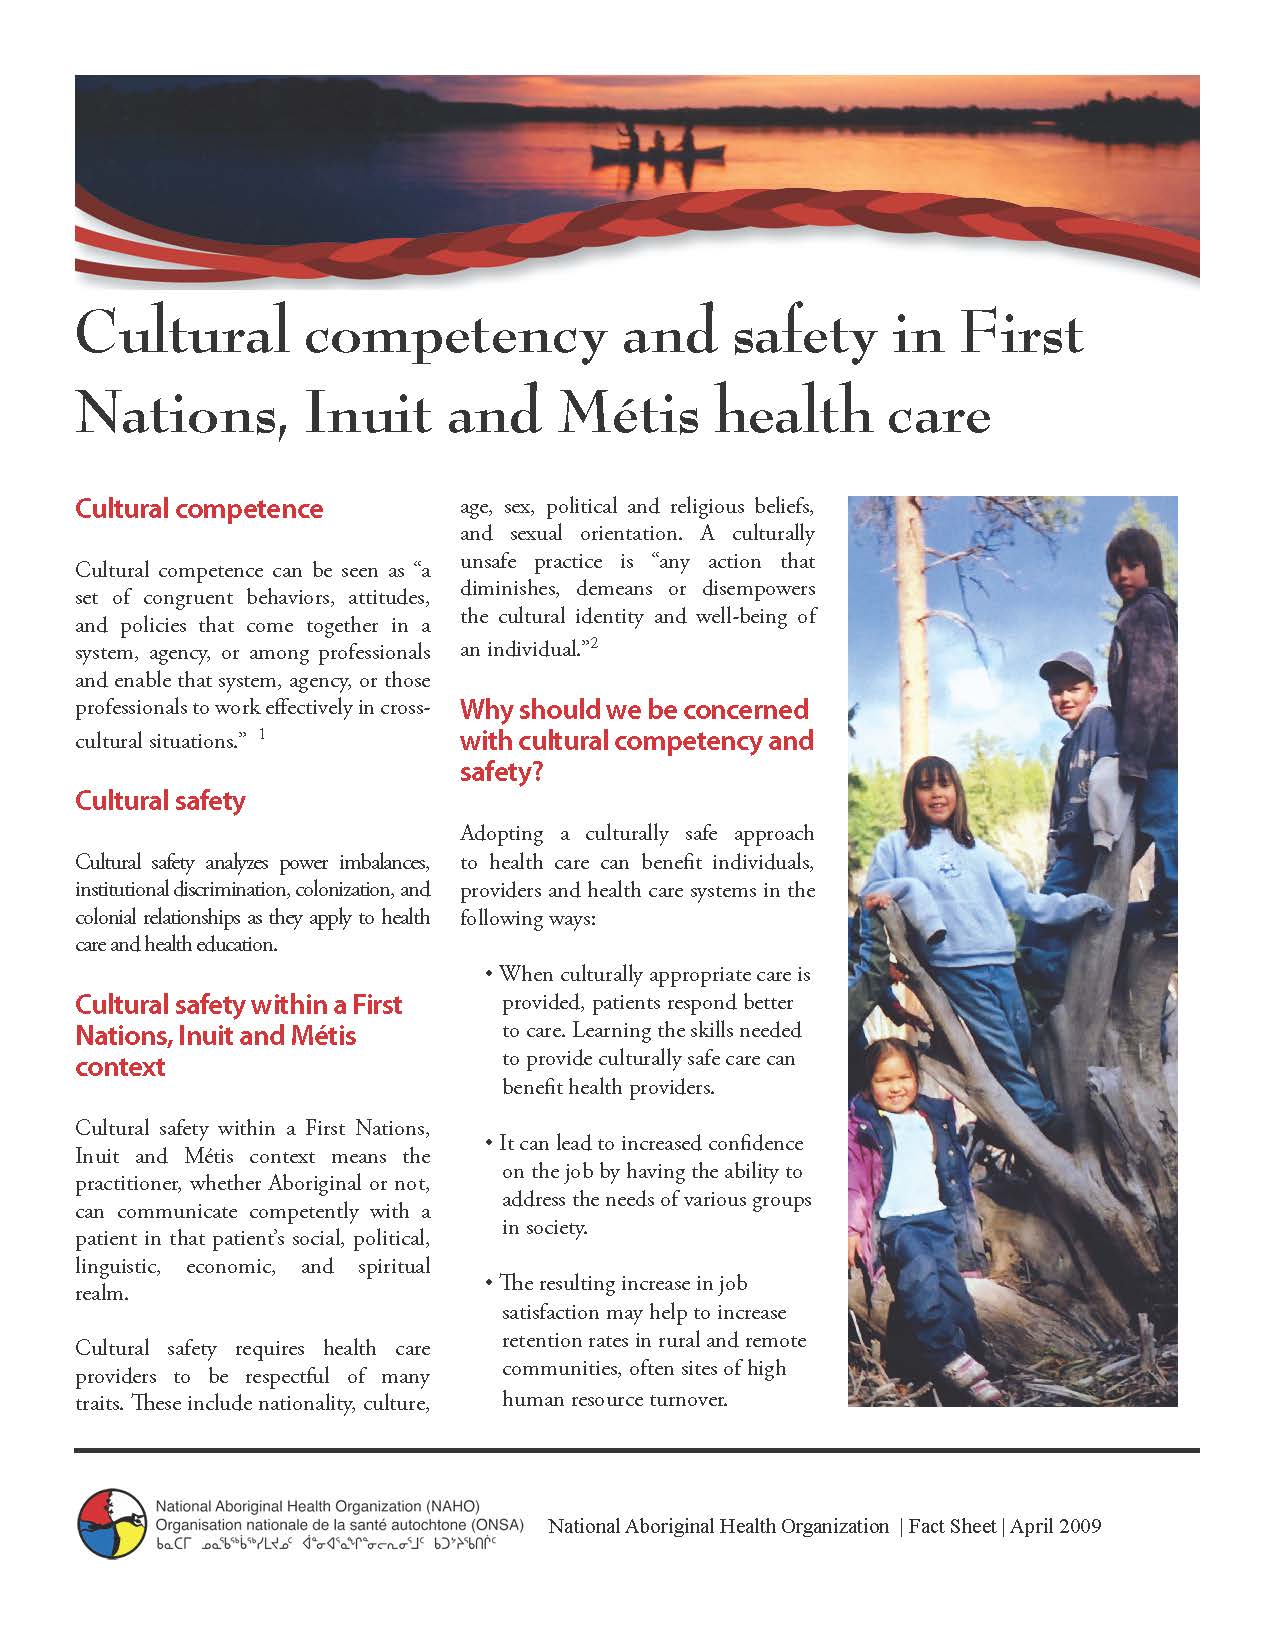 Cultural Competency and Safety in First Nations, Inuit and Metis Health Care